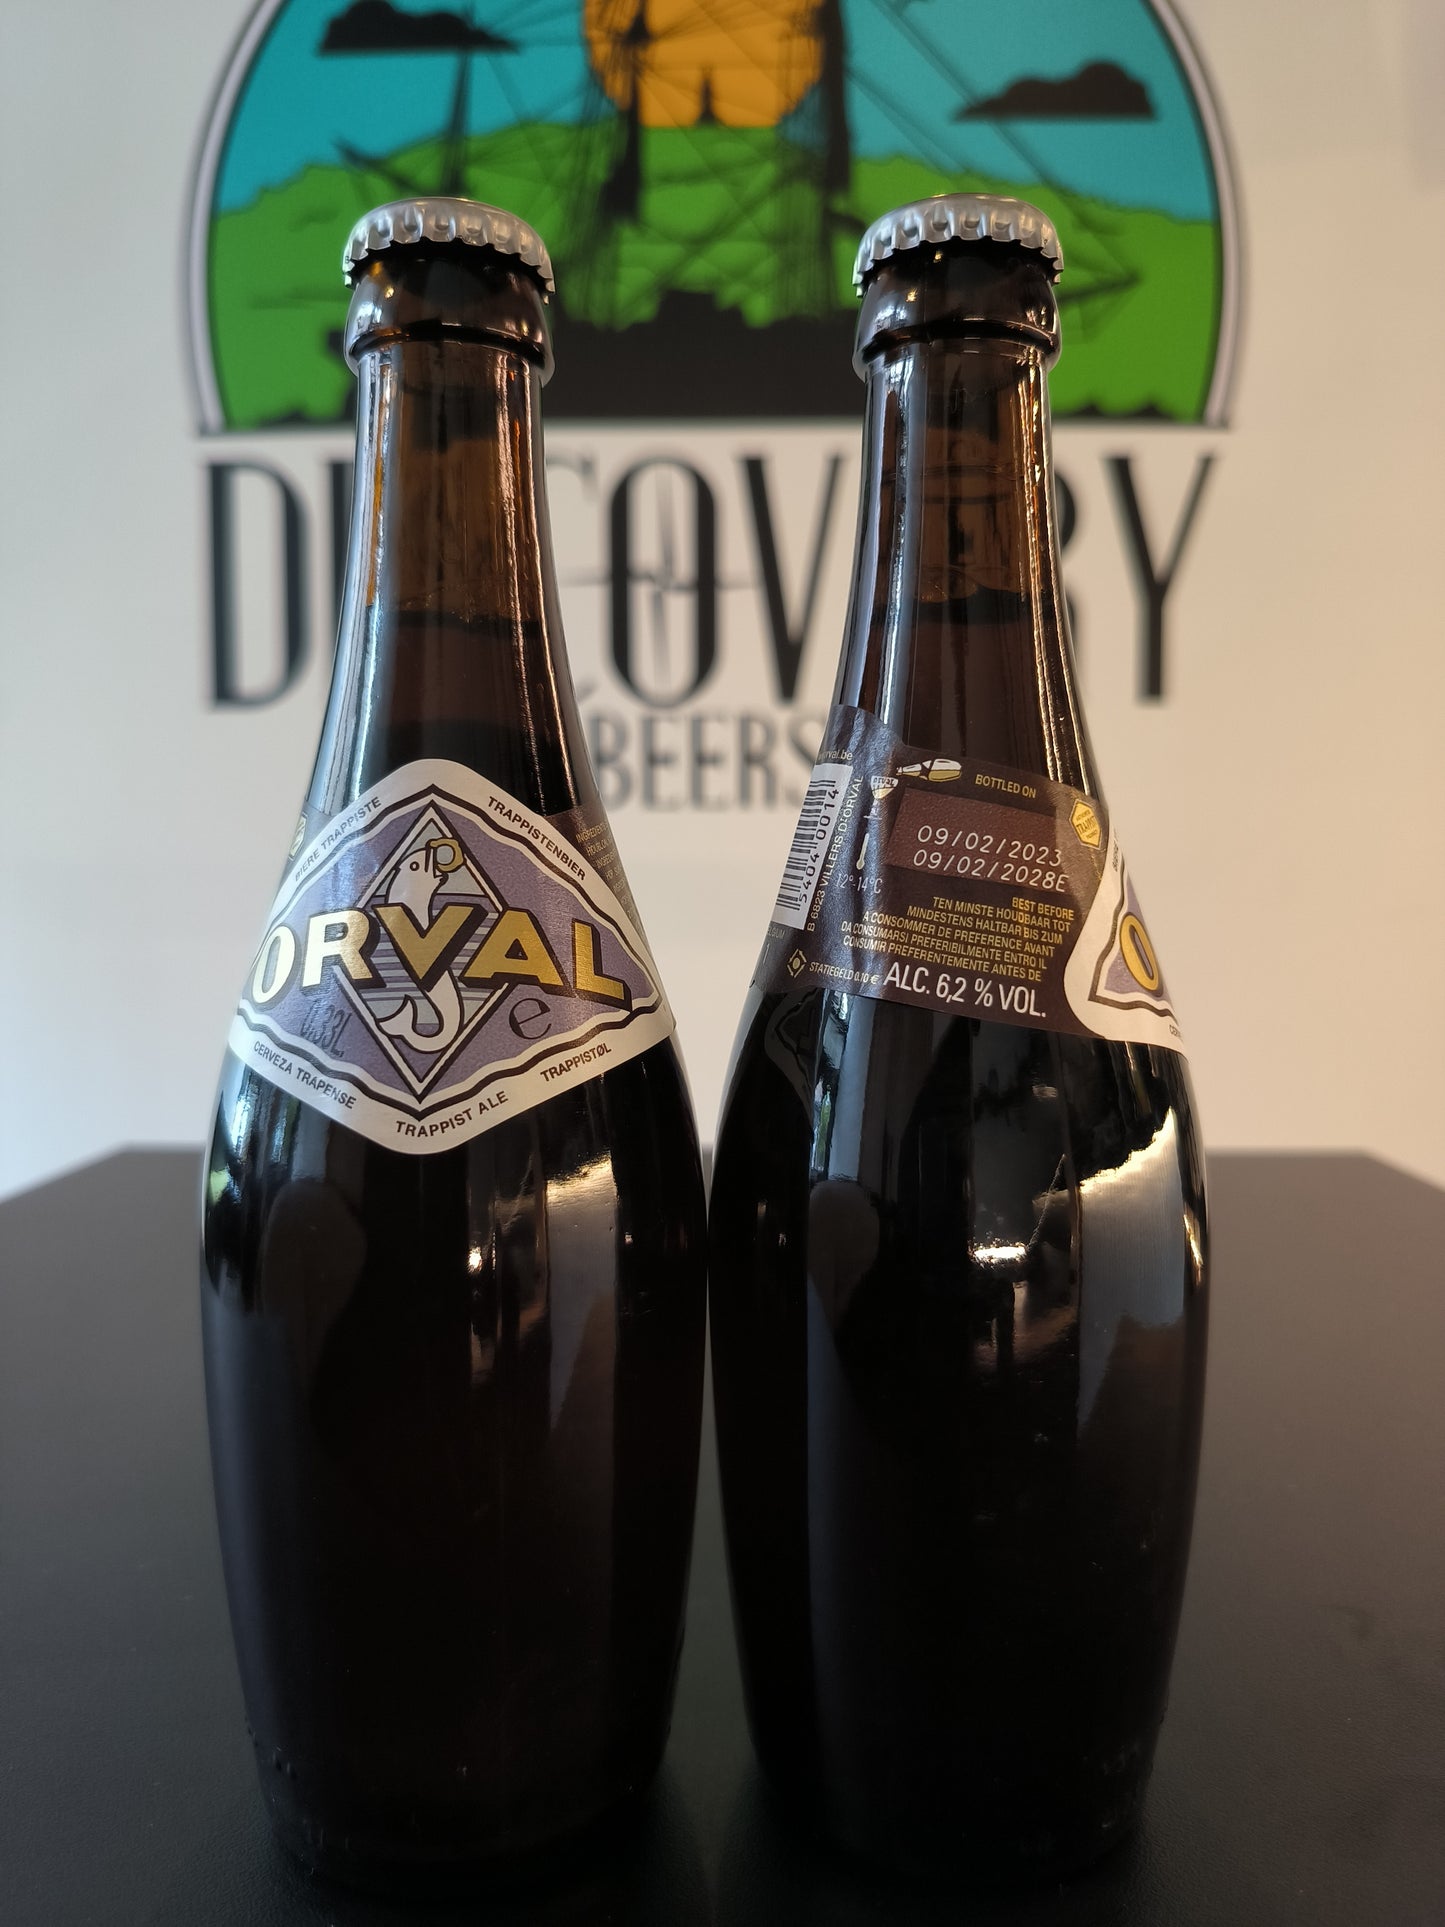 Orval - Trappist